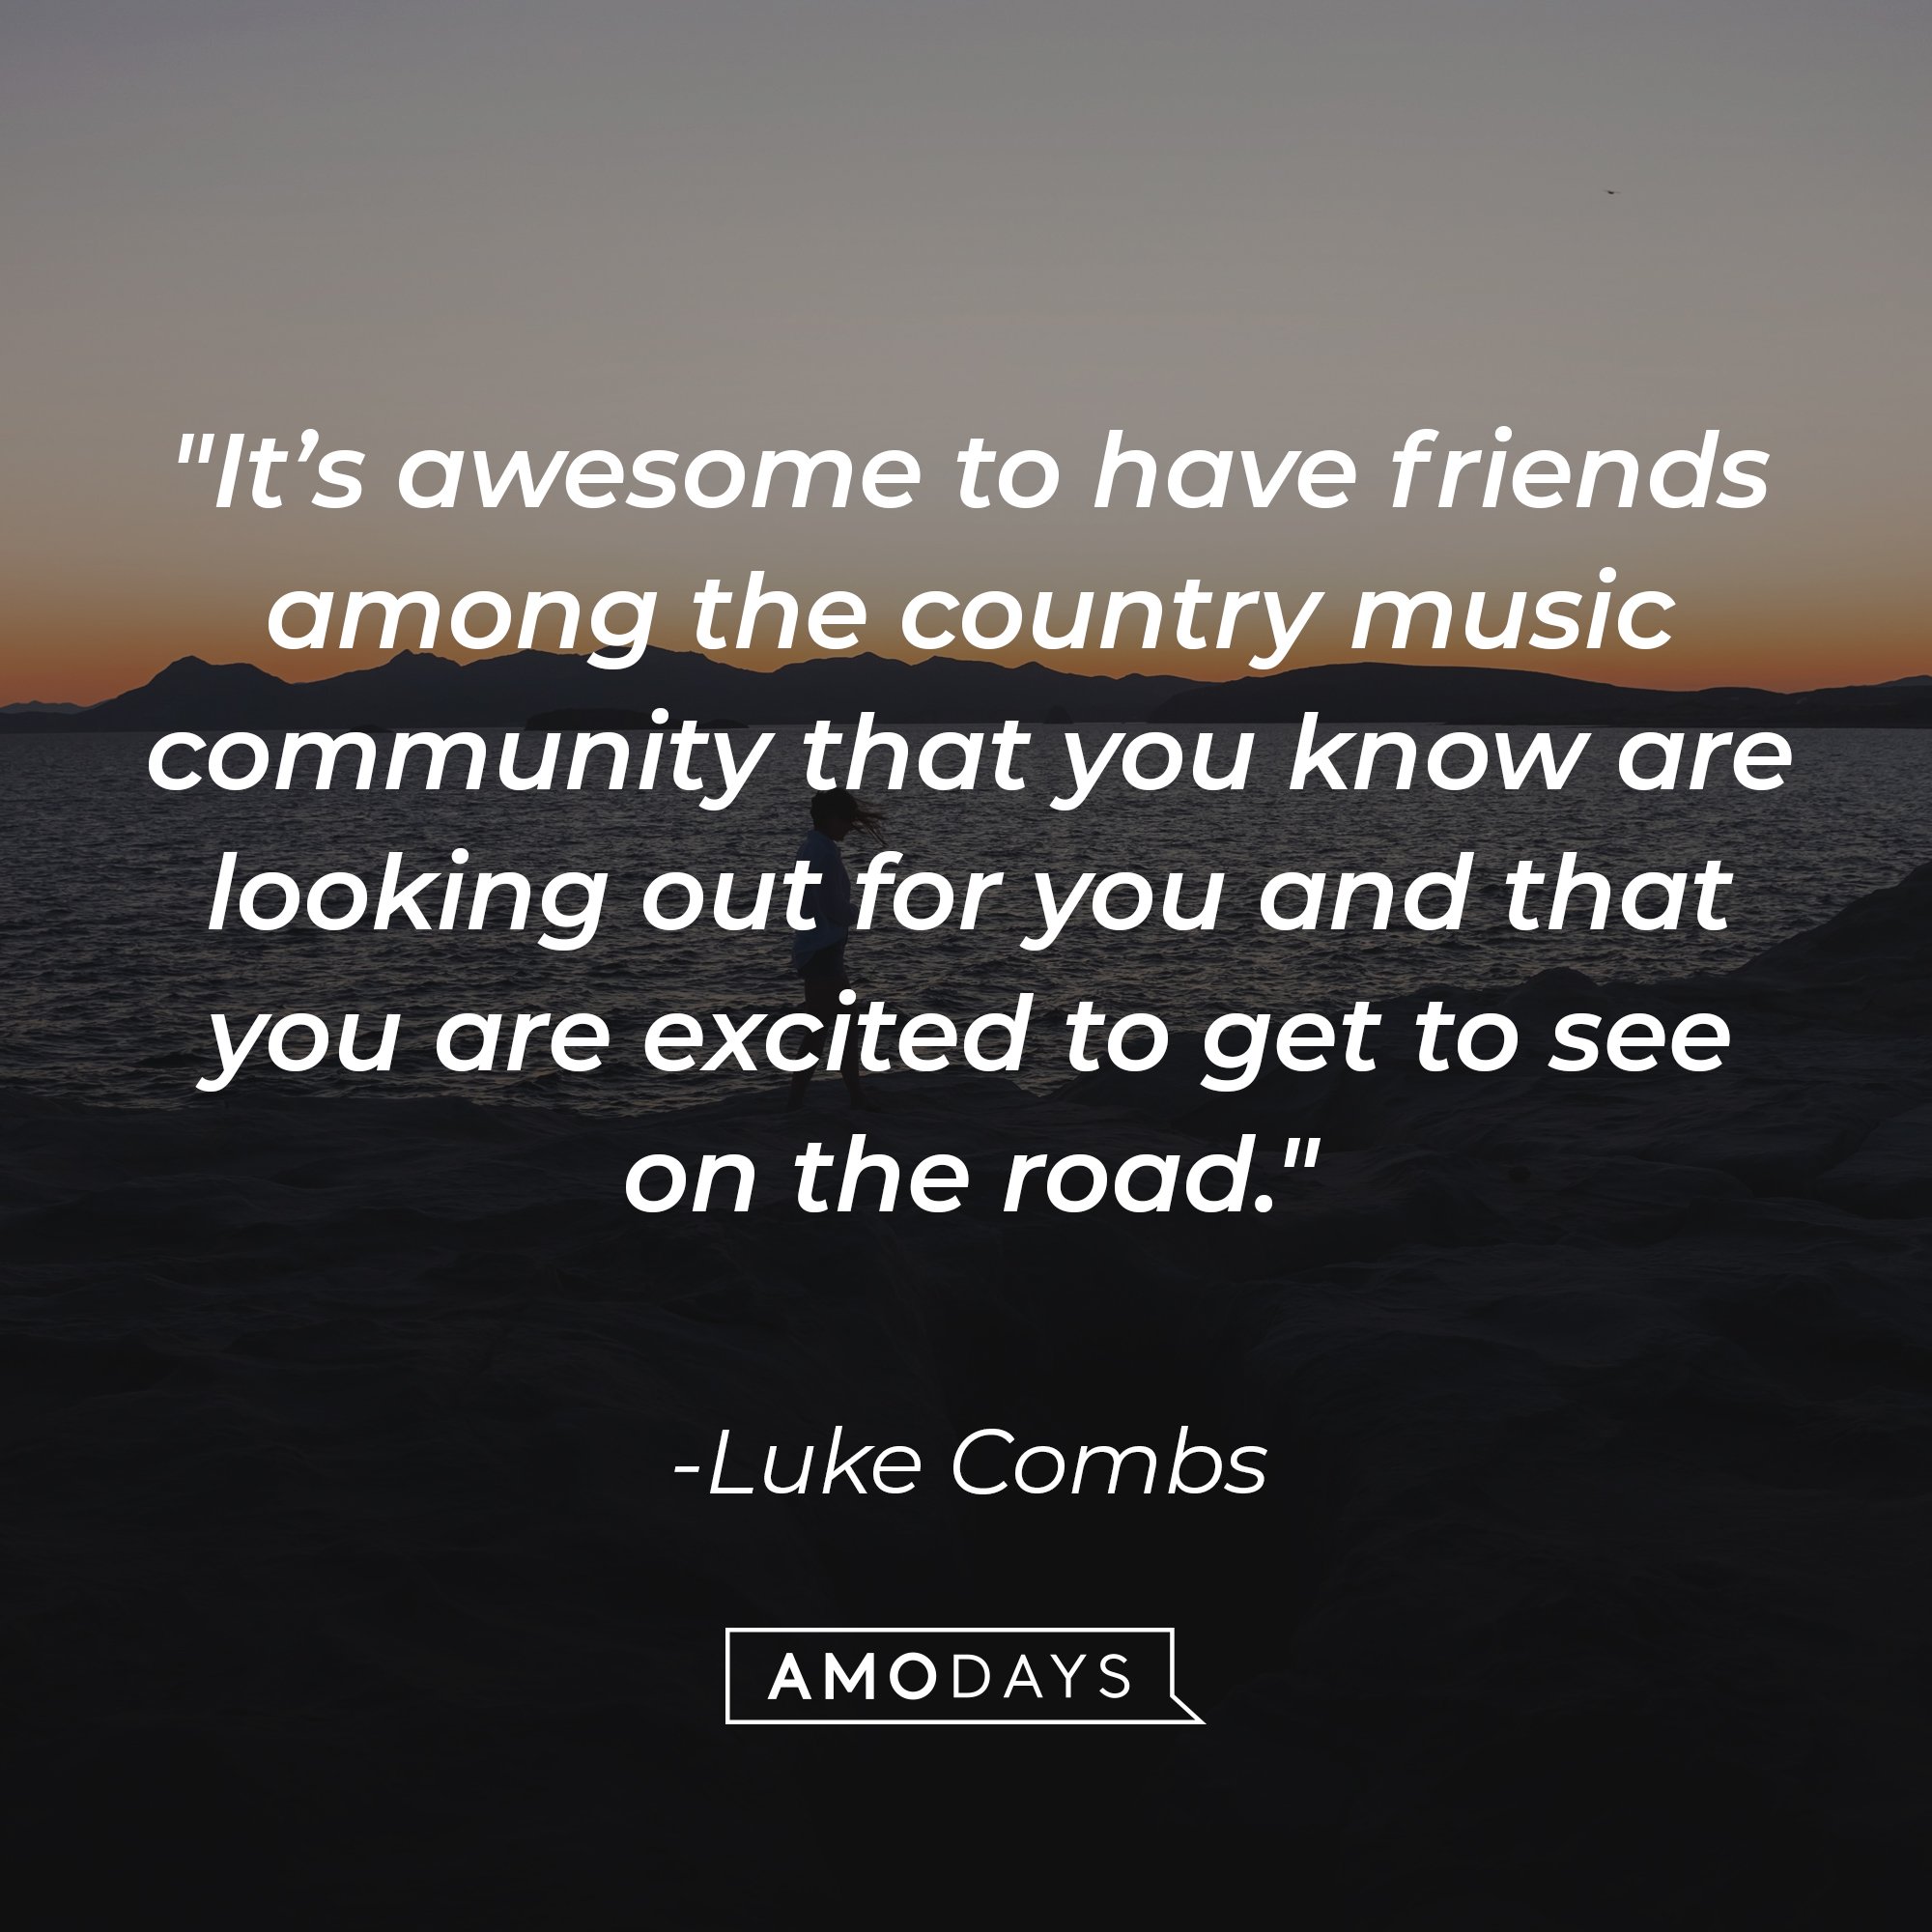 Luke Combs's quote "It’s awesome to have friends among the country music community that you know are looking out for you and that you are excited to get to see on the road." | Source: Unsplash.com